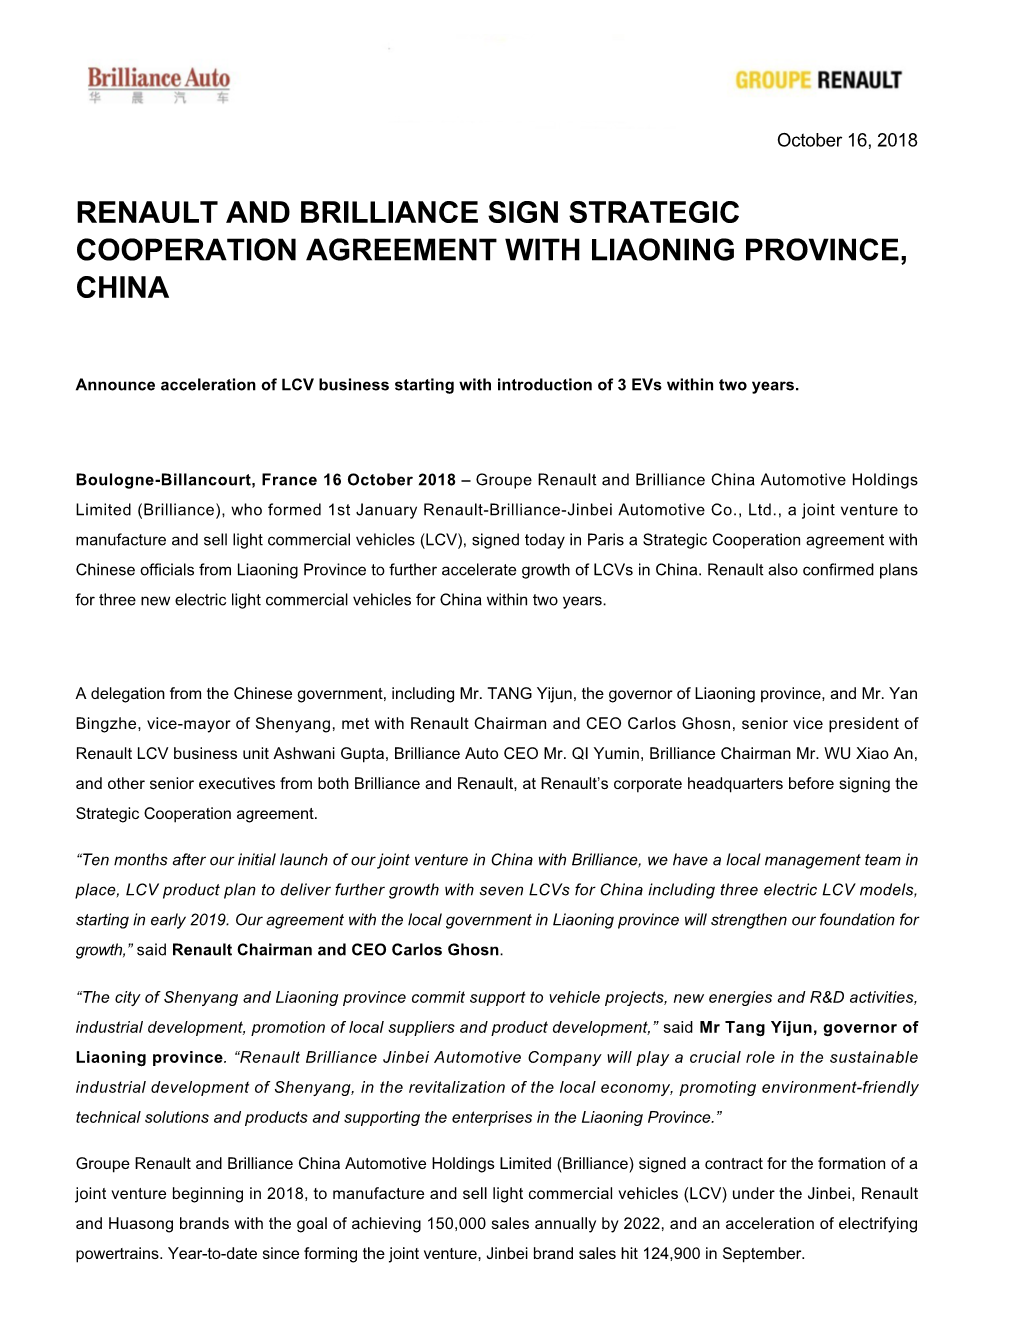 Renault and Brilliance Sign Strategic Cooperation Agreement with Liaoning Province, China